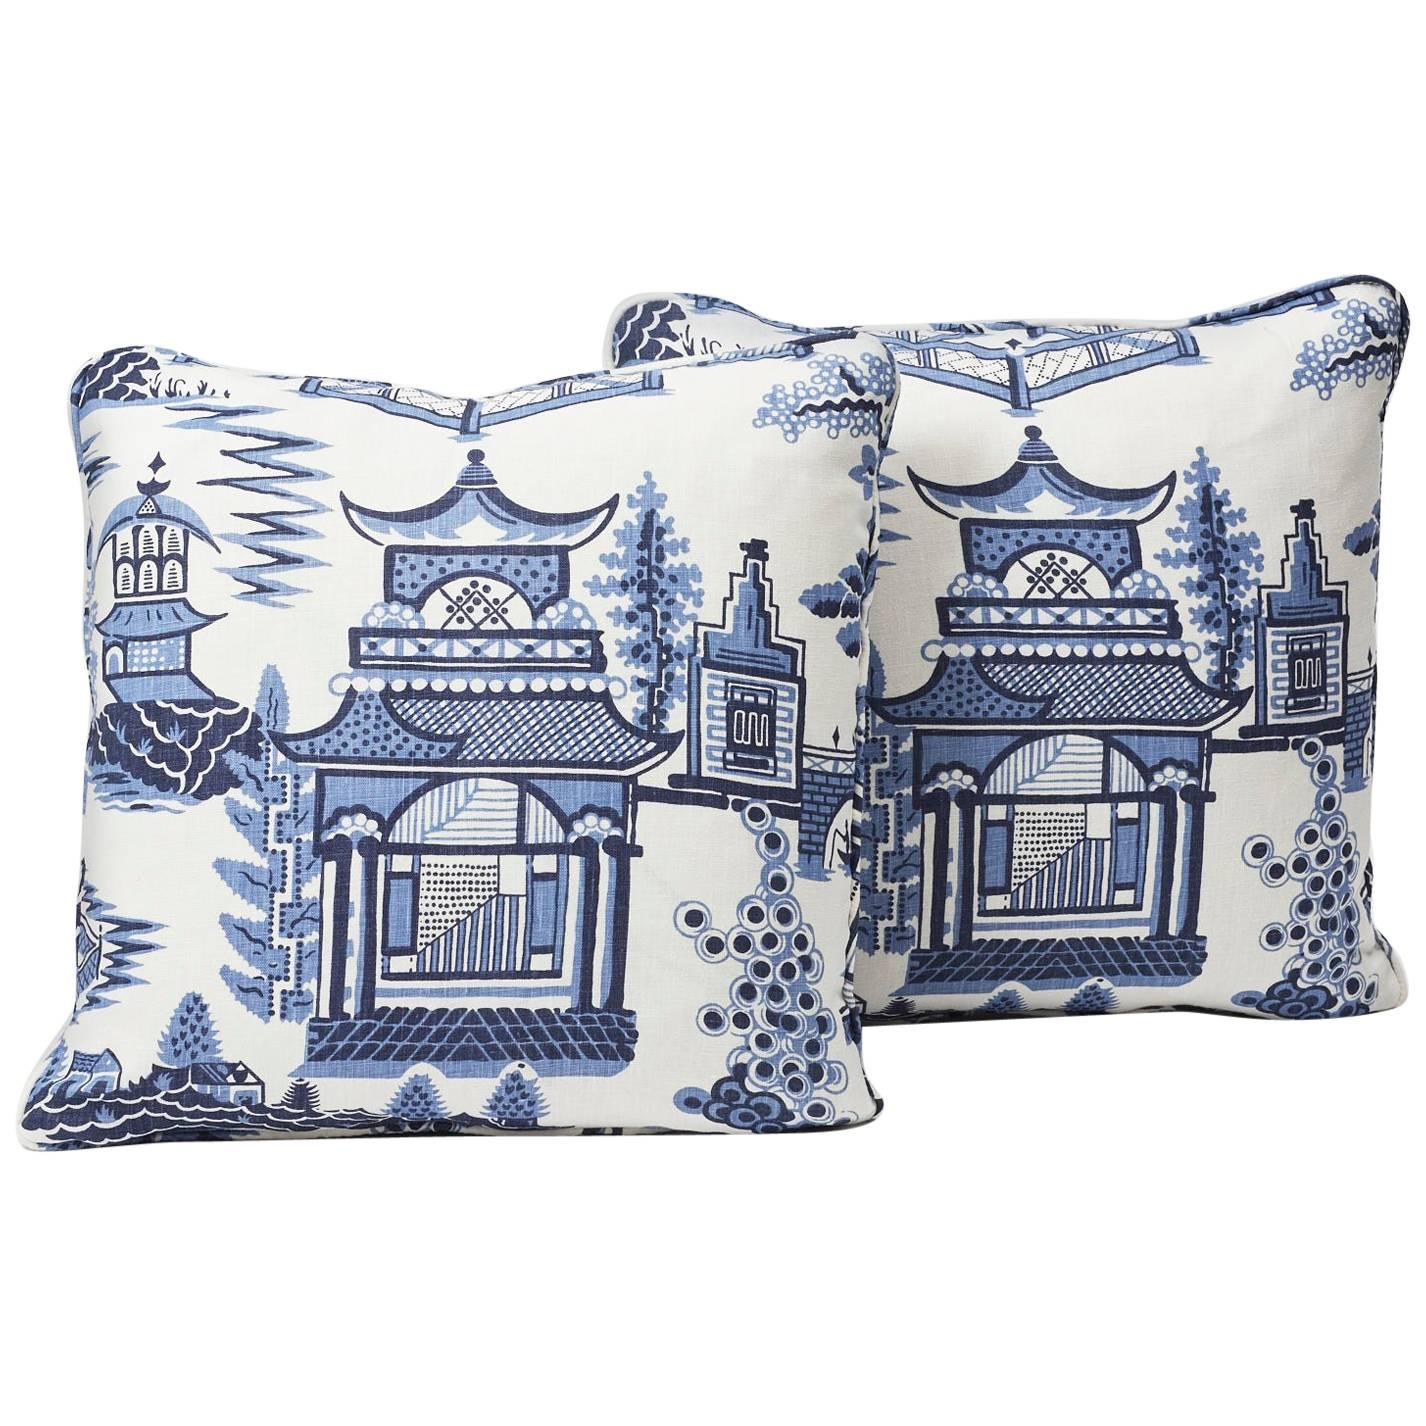 Based on an archival print, Nanjing is a modern take on Classic chinoiserie motifs, with stylized trees, pagodas and fretwork fences. Featured as a decorative accent, this Schumacher Classic pattern is sure to elevate and modernize any interior or